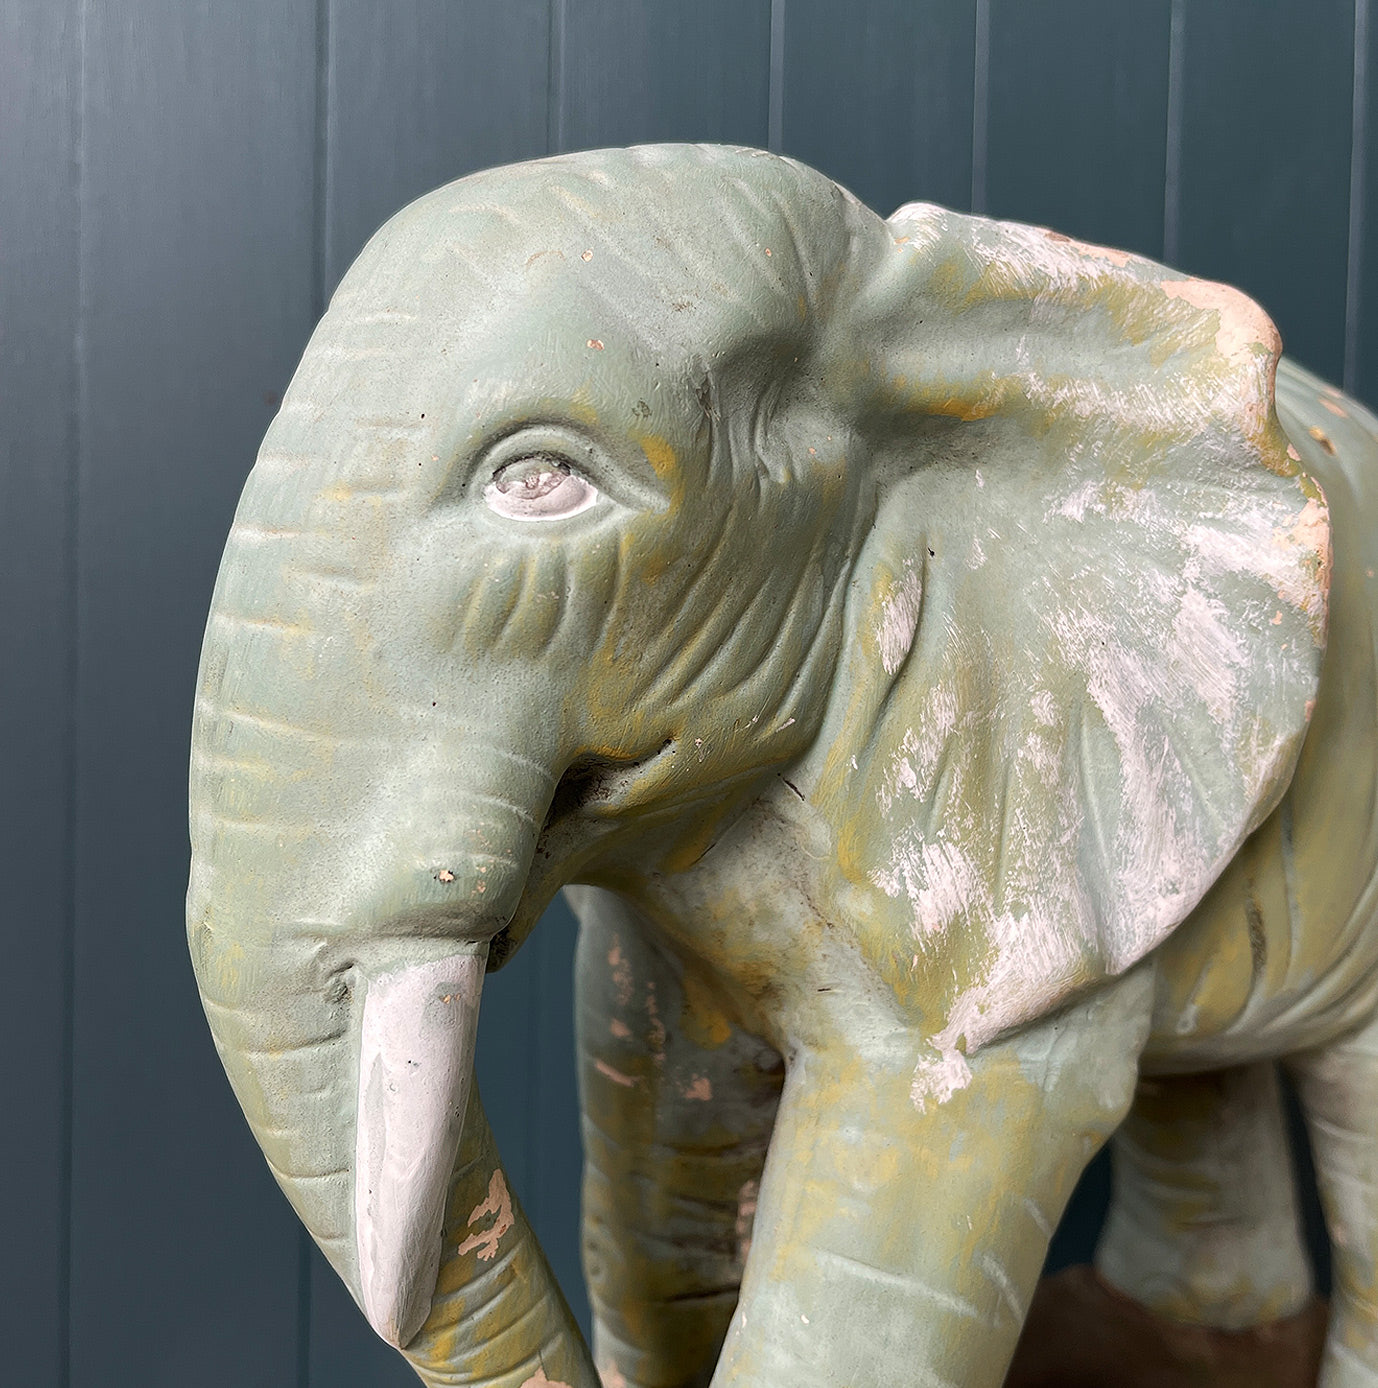 Wonderful large Vintage Green Advertising Elephant reportedly made for Esso's Elephant Kerosene. The green painted finish is a hand painted chalky green colour with yellowy green painted highlights. He stands majestically on a rocky base - SHOP NOW - www.intovintage.co.uk